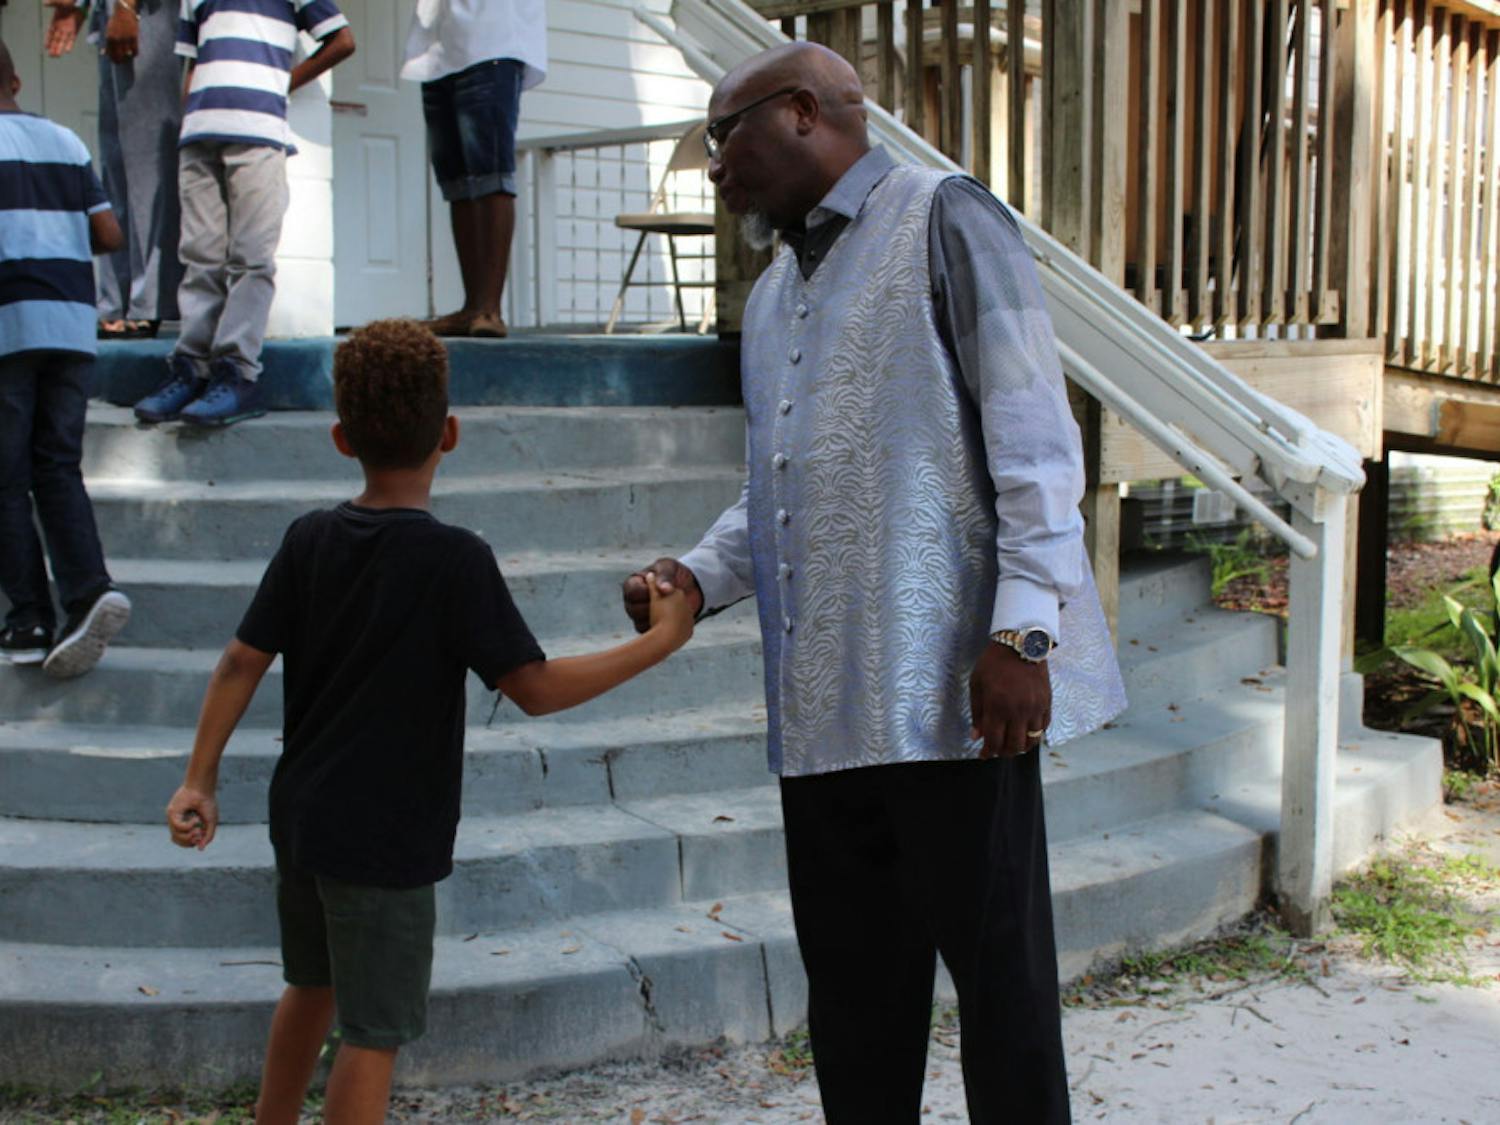 Chris Stokes greets a young churchgoer on Sunday outside the New Beginning Christian Worship Center in Micanopy. About 20 children attended the service.